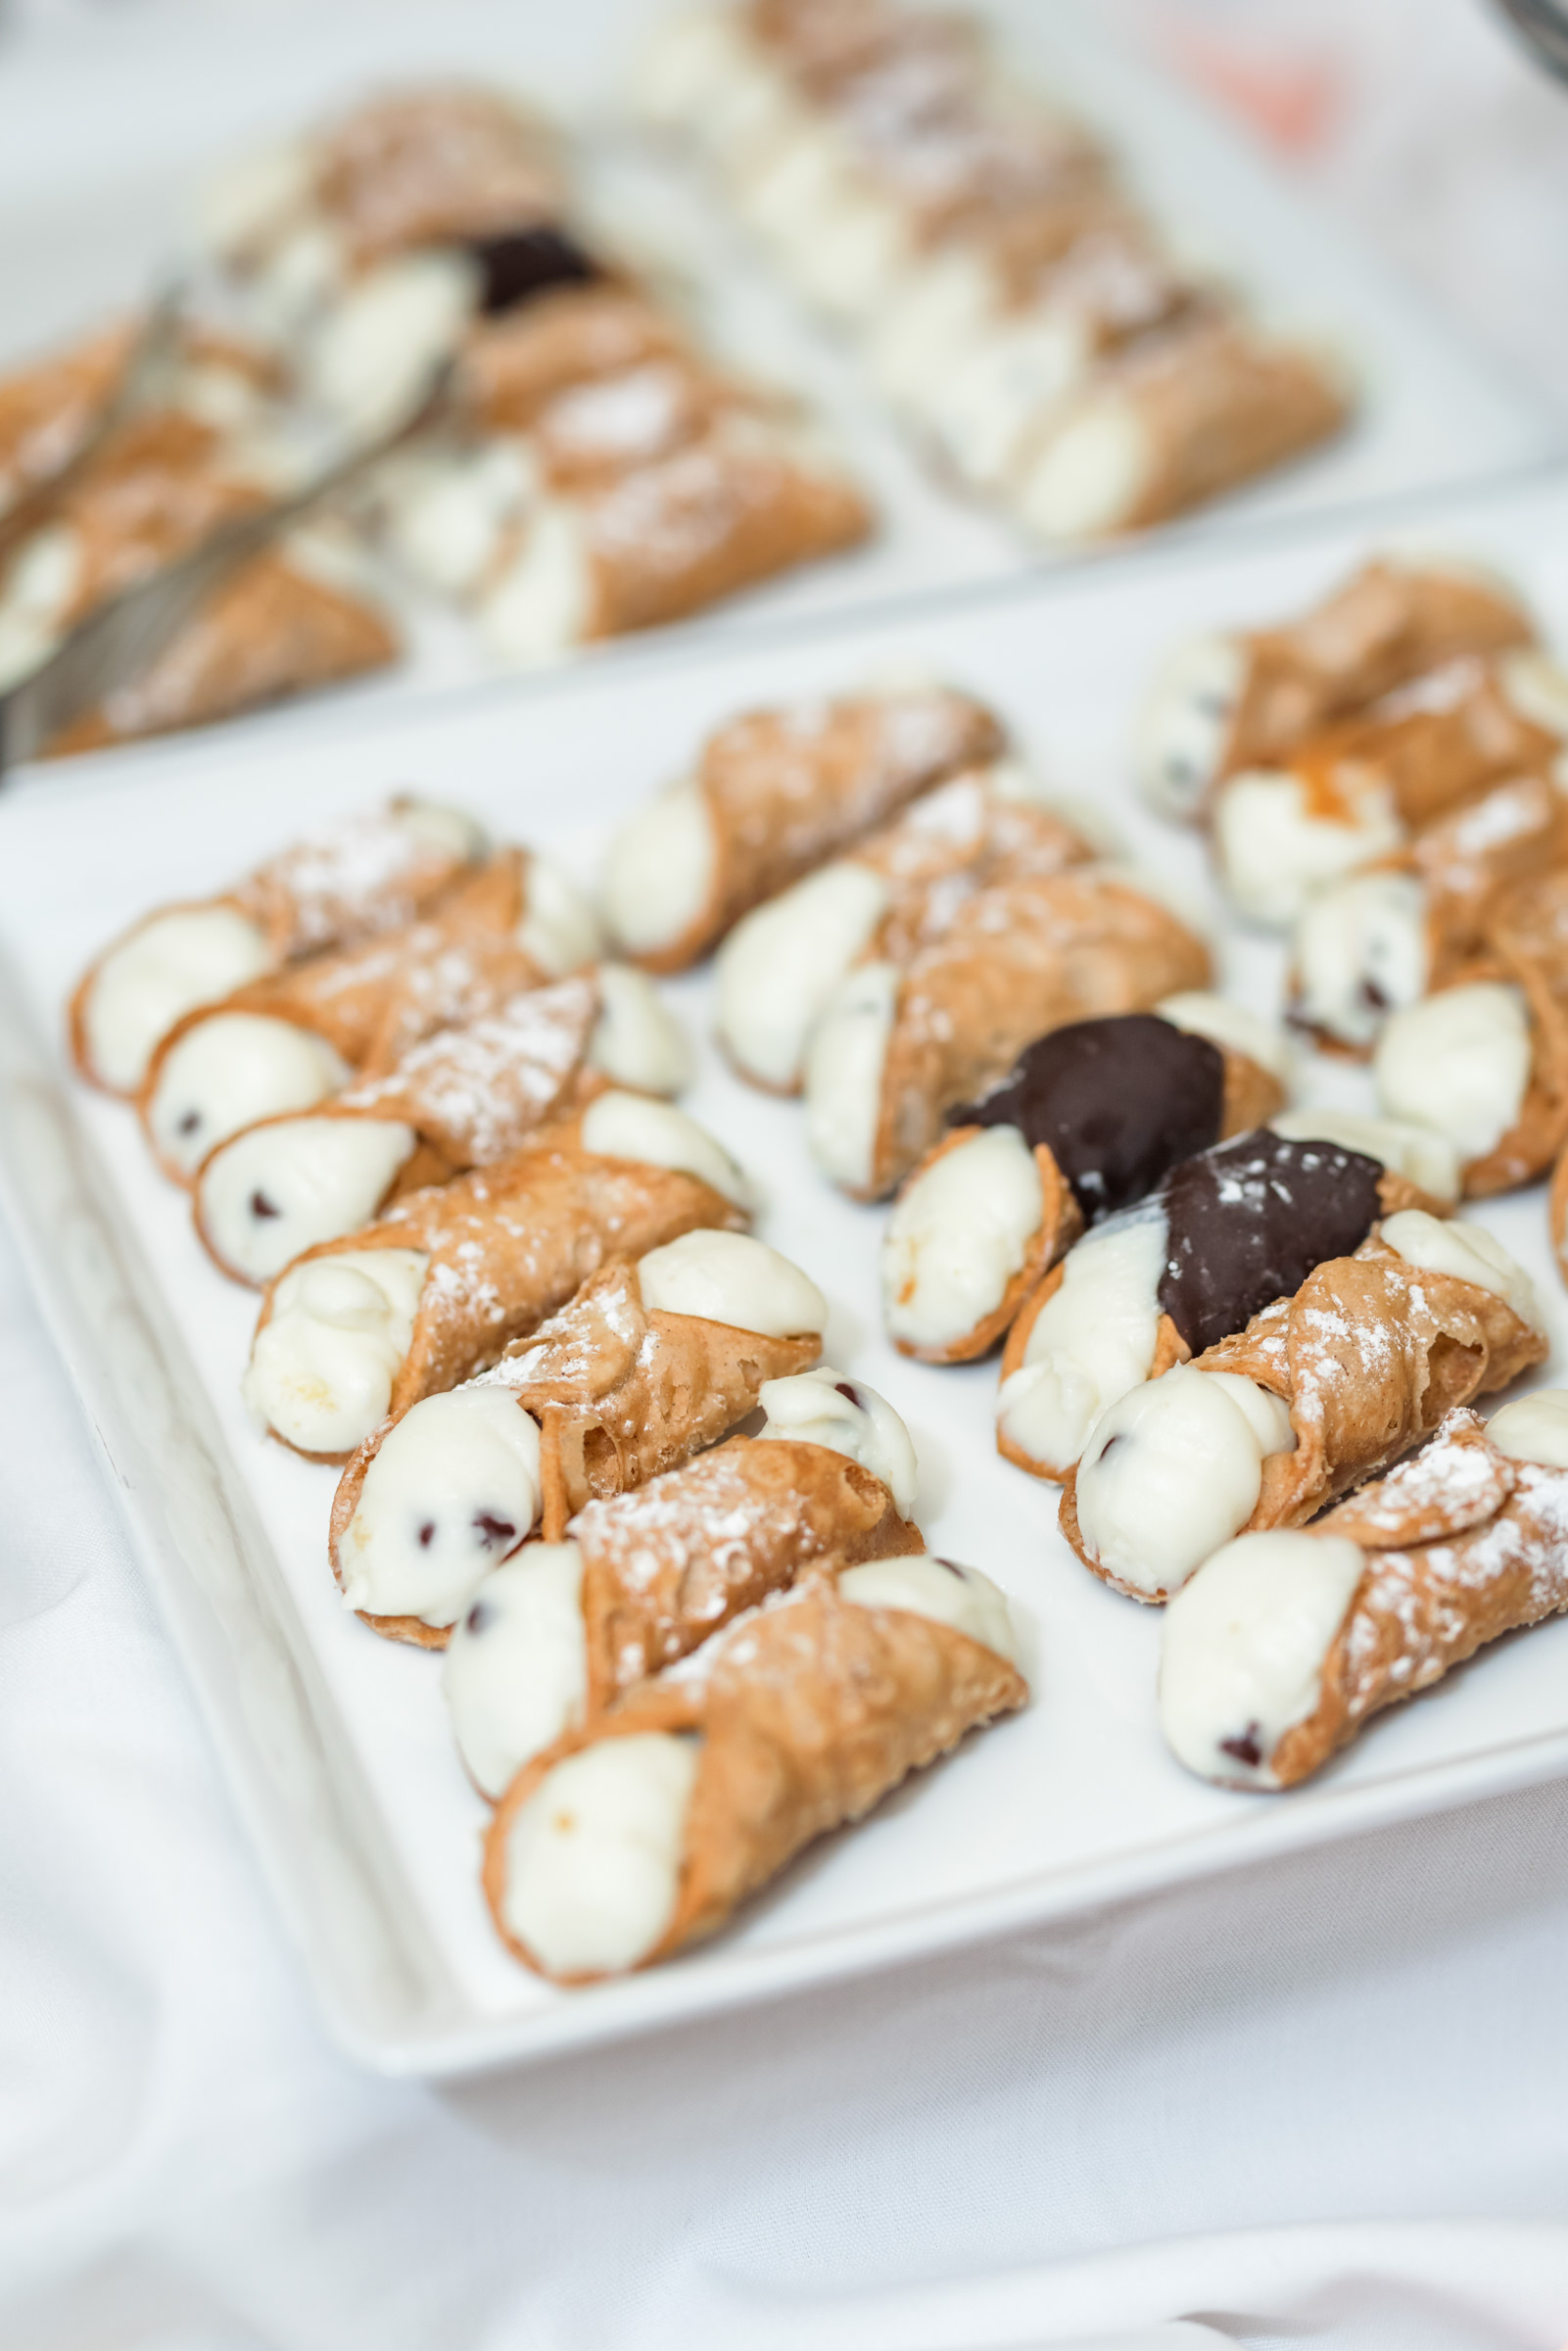 plate of cannolis with chocolate chips on dessert table